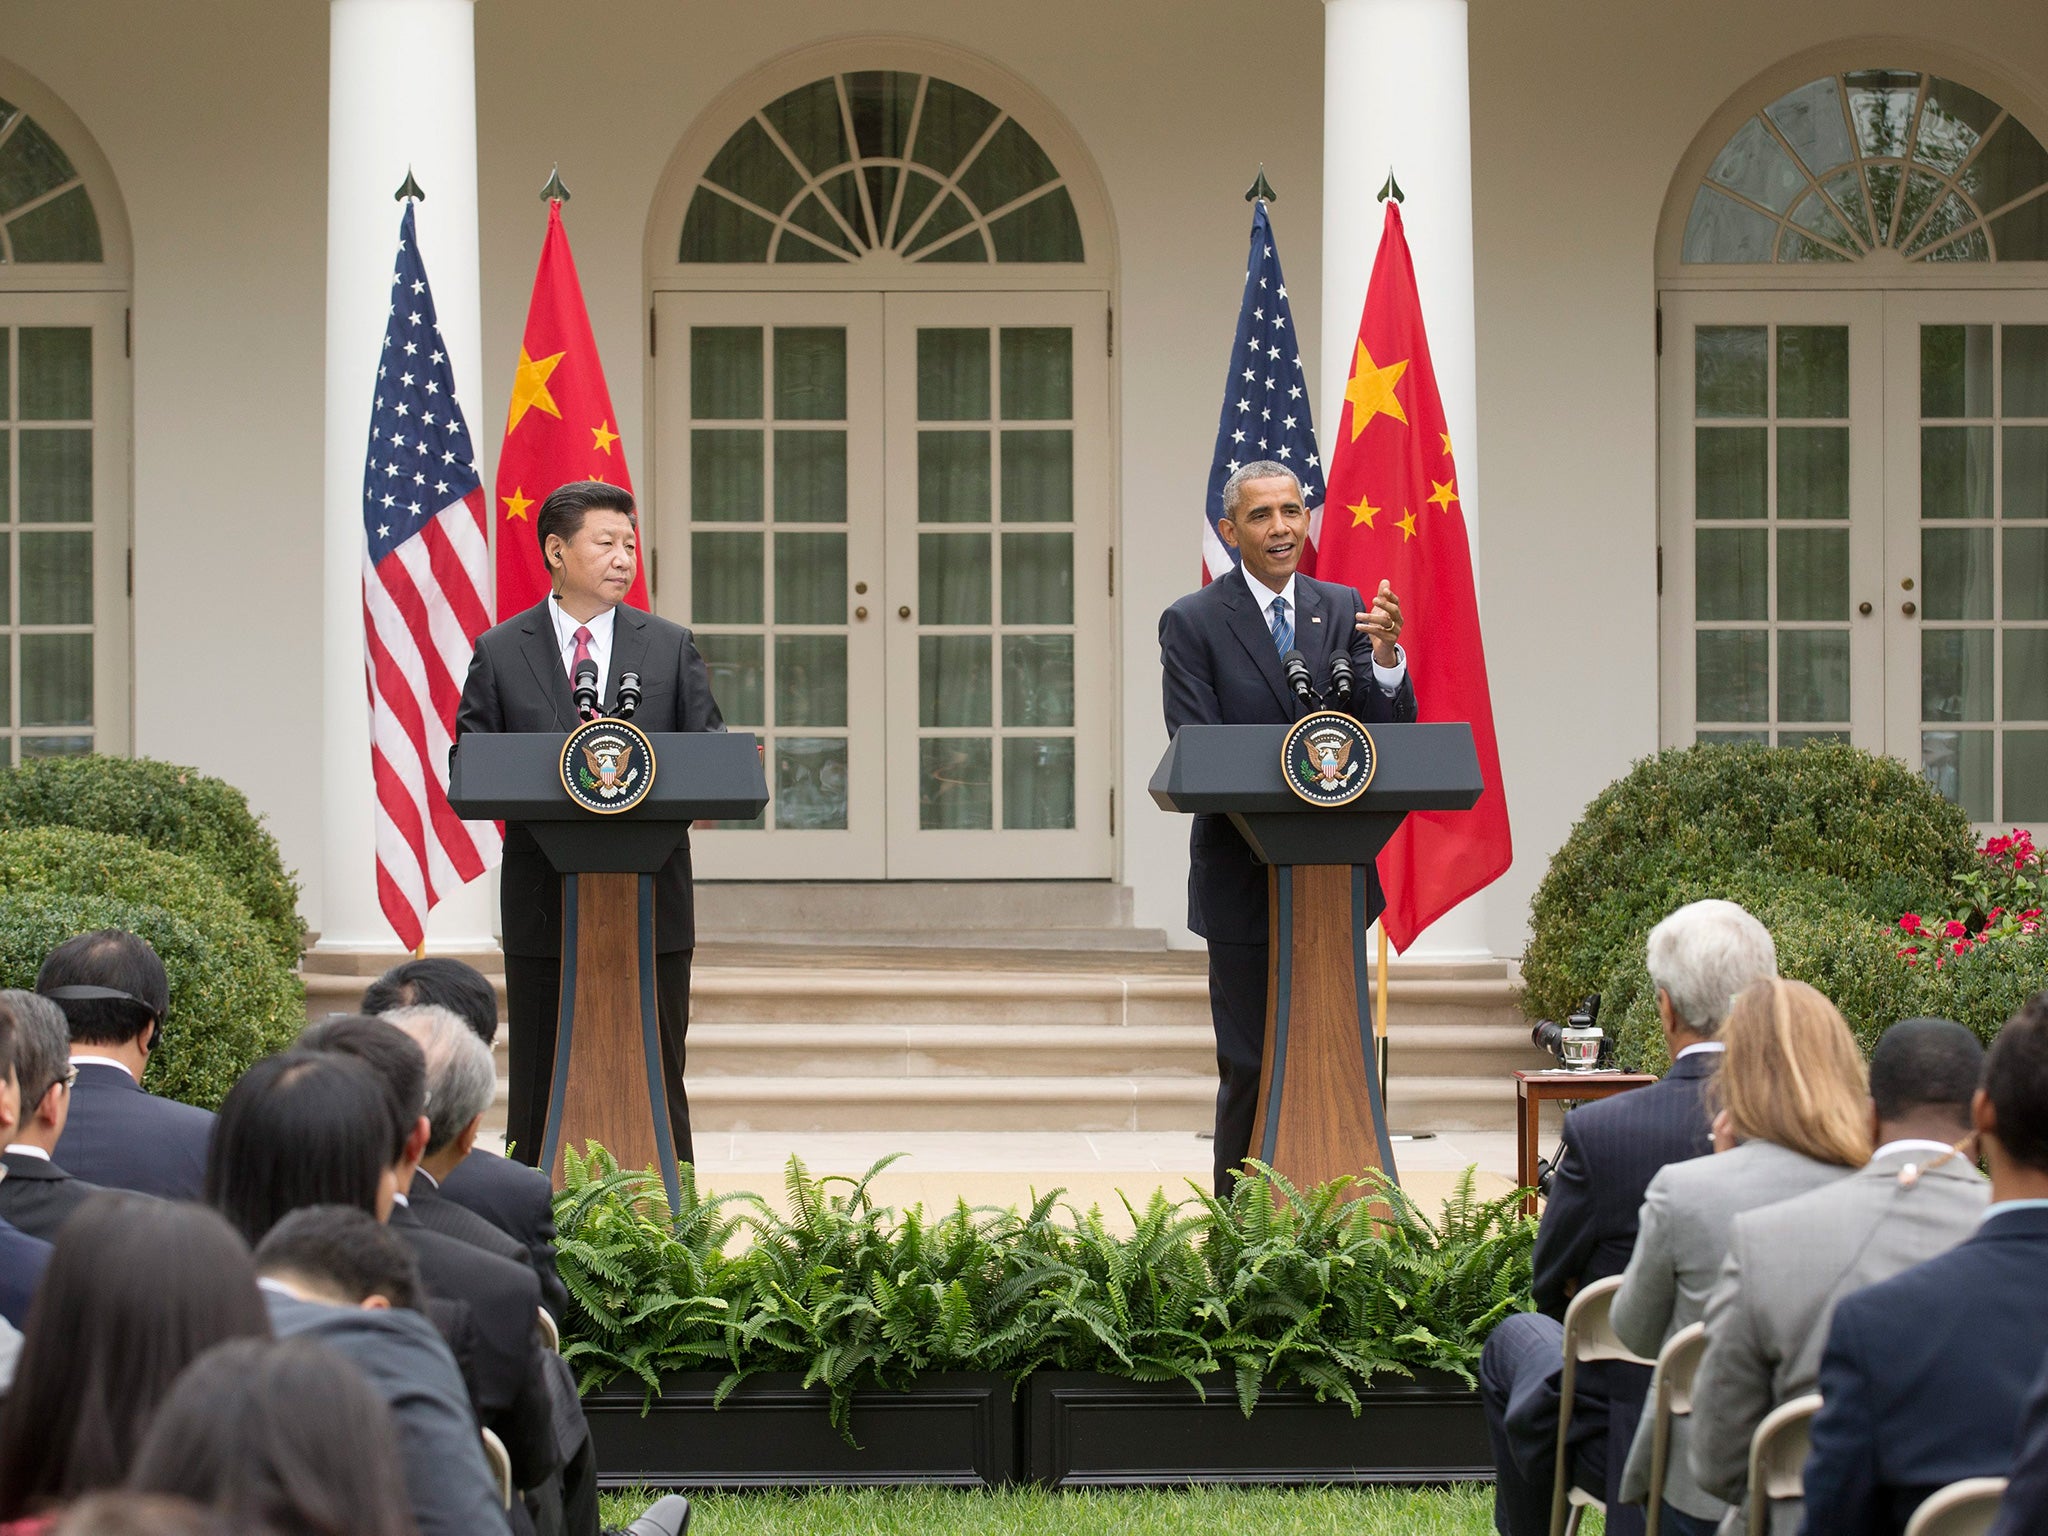 President Barack Obama (R) and President of China Xi Jinping (L) hold a joint news conference in the Rose Garden of the White House, in Washington, DC, USA, 25 September 2015